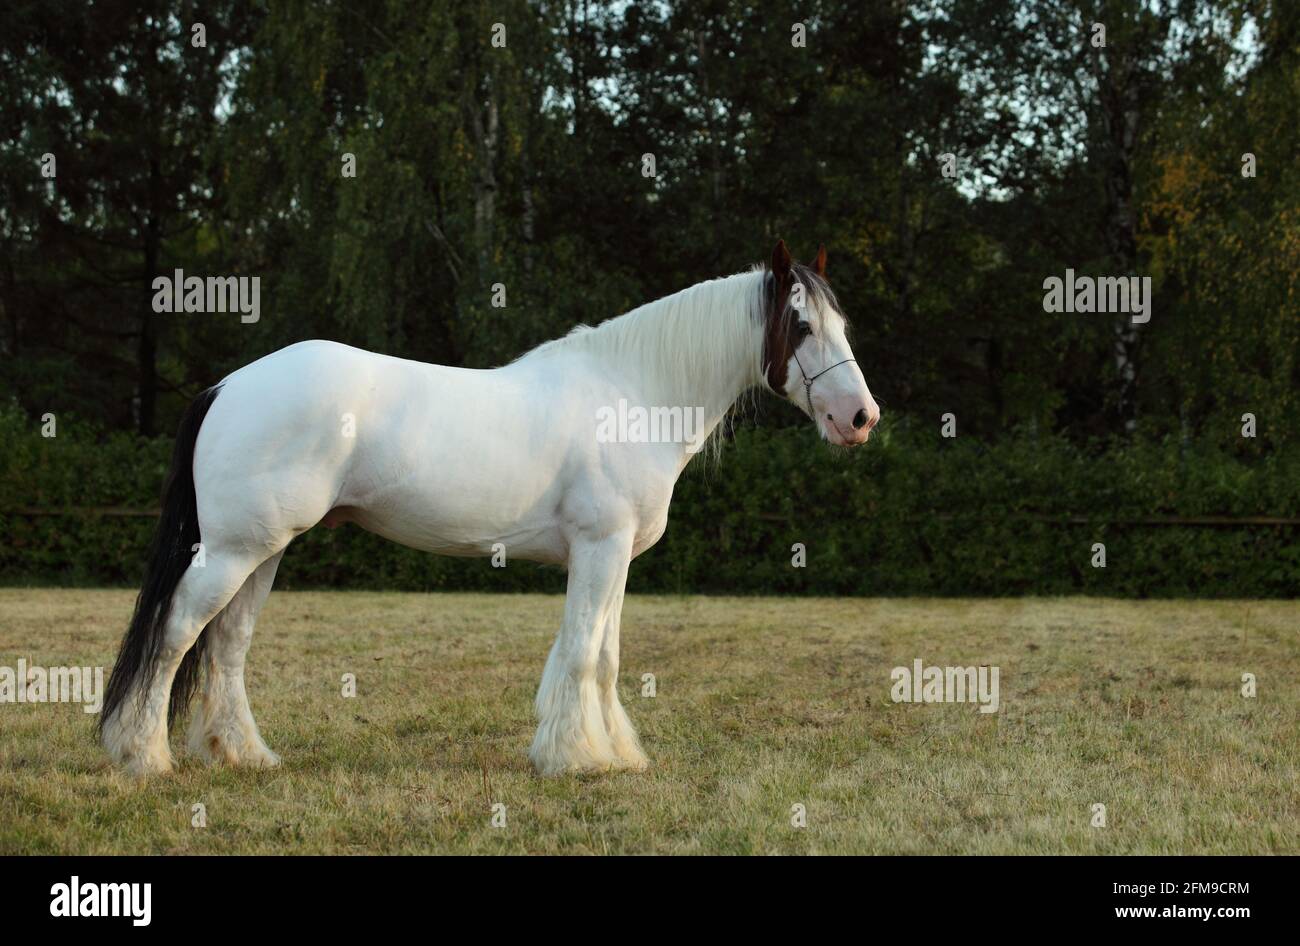 American Paint Horse stallion galloping in paddock at dusk Stock Photo